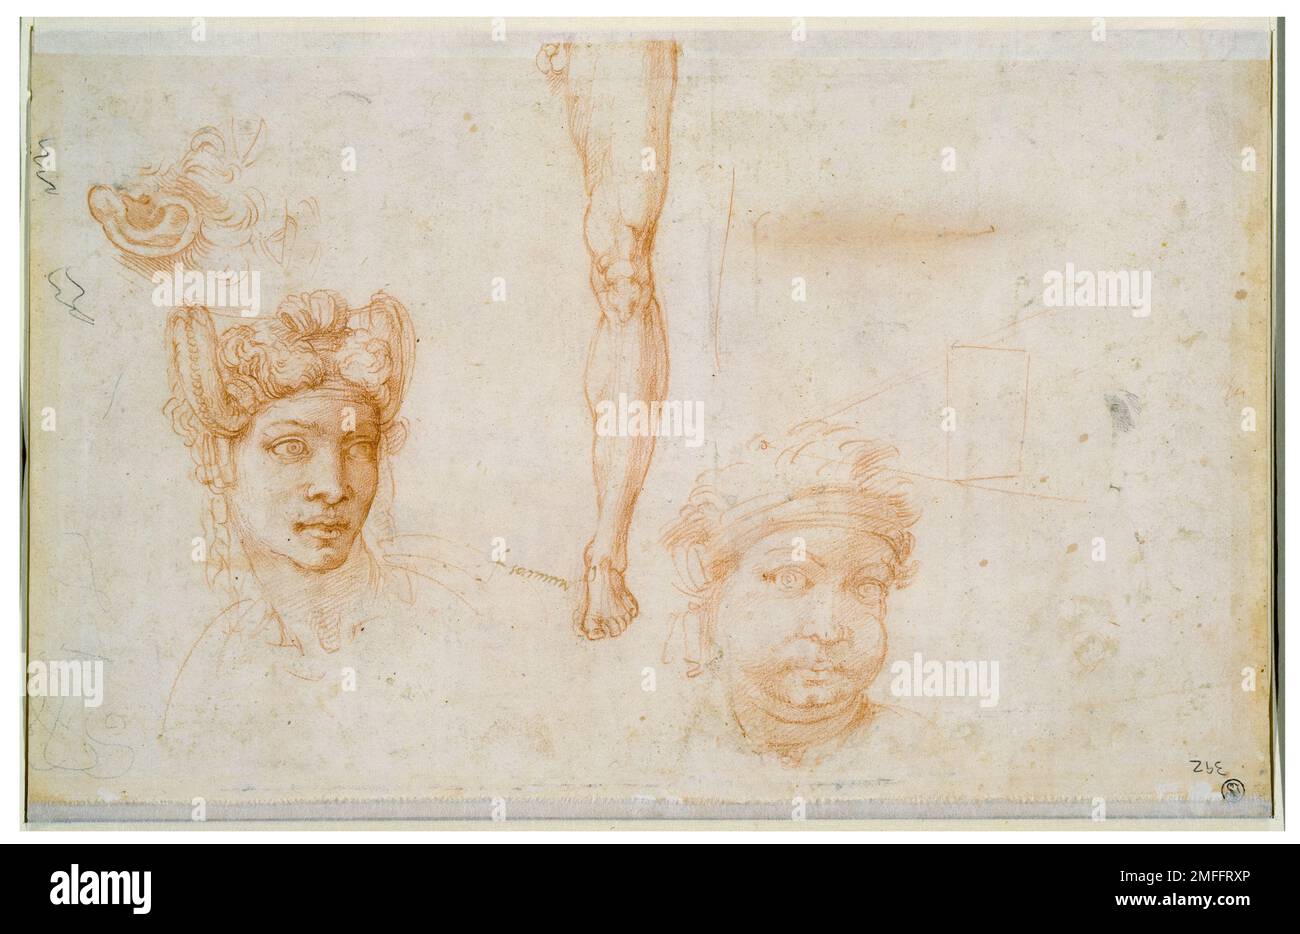 Michelangelo Buonarroti and workshop, Ear and Two Eyes, Woman’s Head with Plaited Hair, Leg Study, Head with Bandage, drawing in red chalk on ribbed paper, circa 1525 Stock Photo